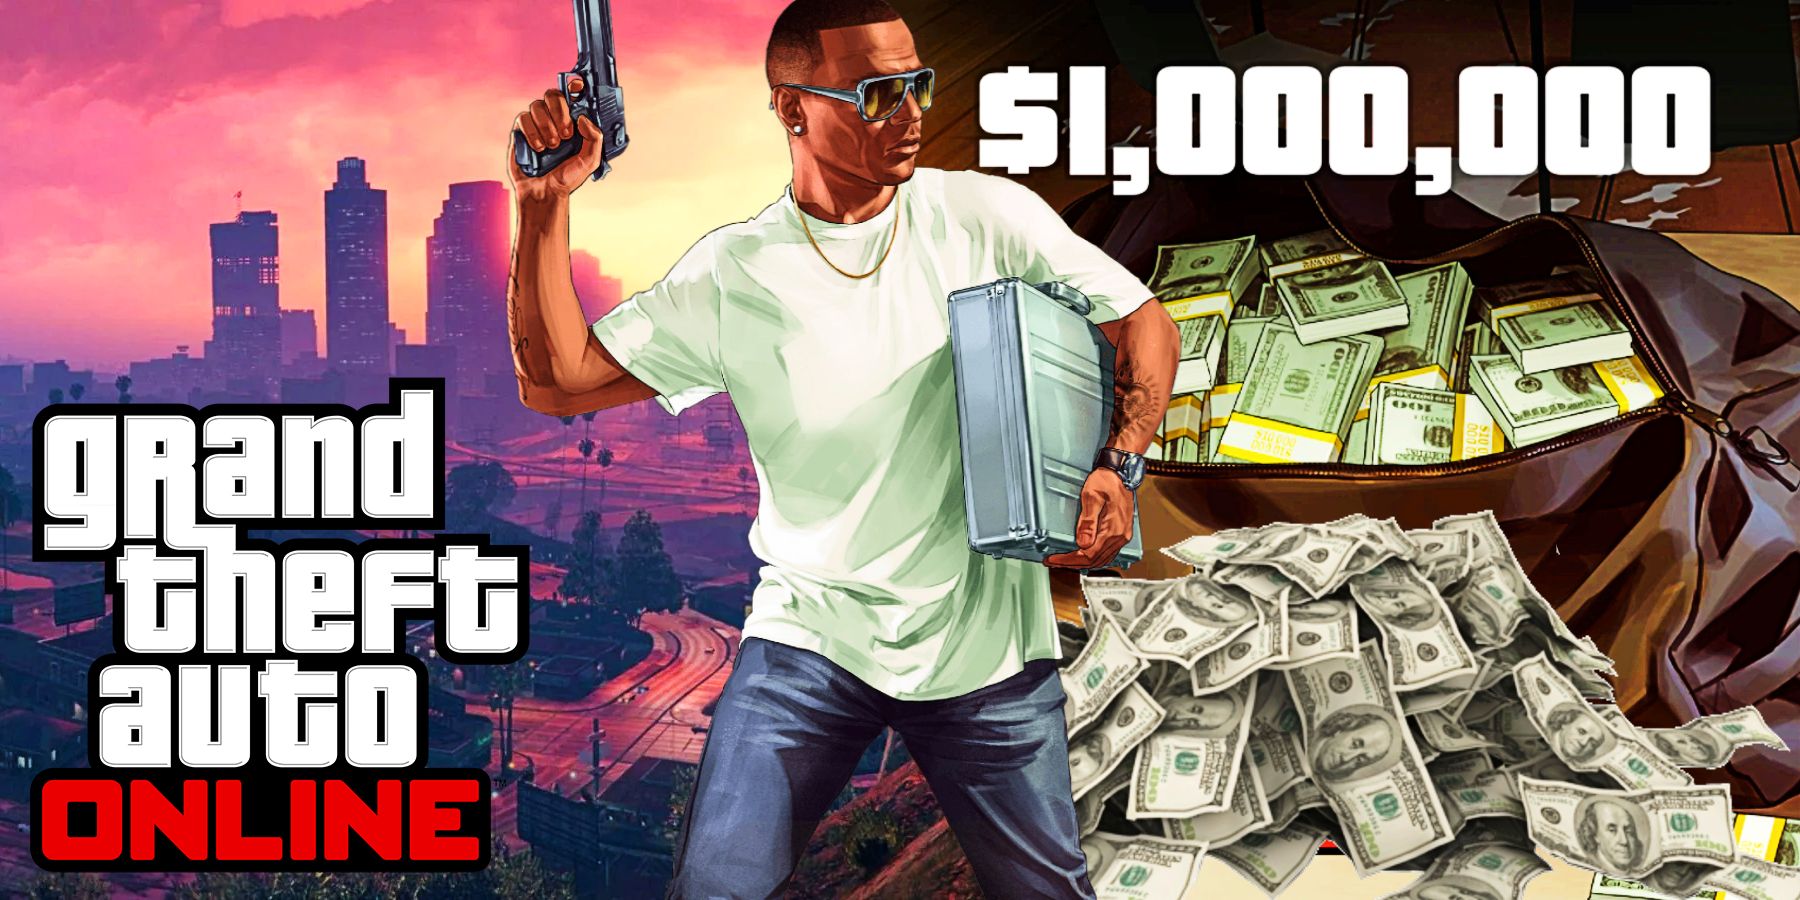 PlayStation Plus players can get free in-game money in GTA Online every  month - MSPoweruser